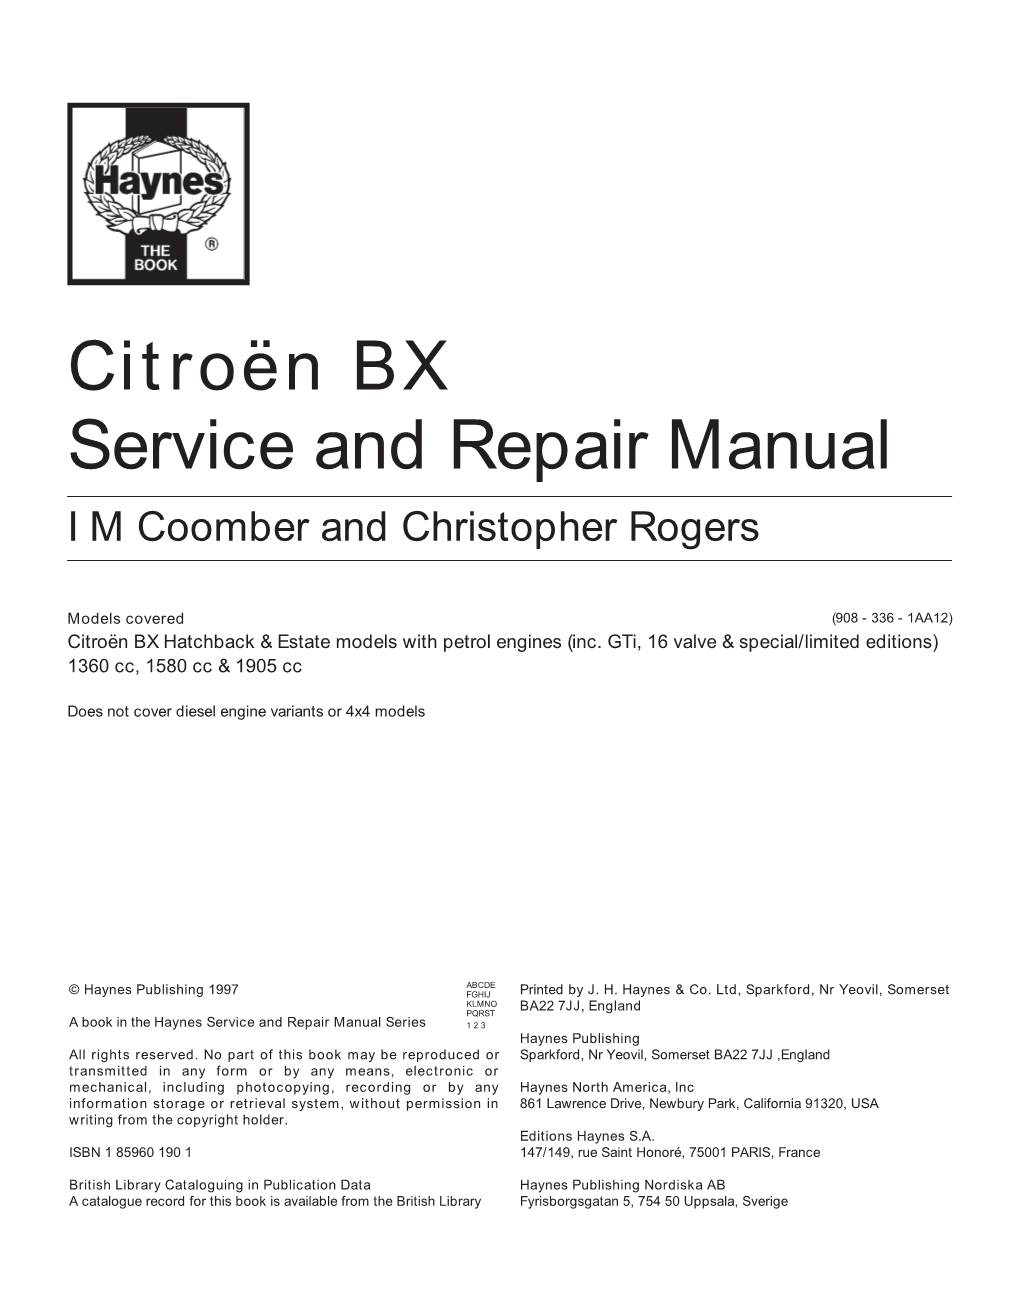 Citroën BX Service and Repair Manual I M Coomber and Christopher Rogers